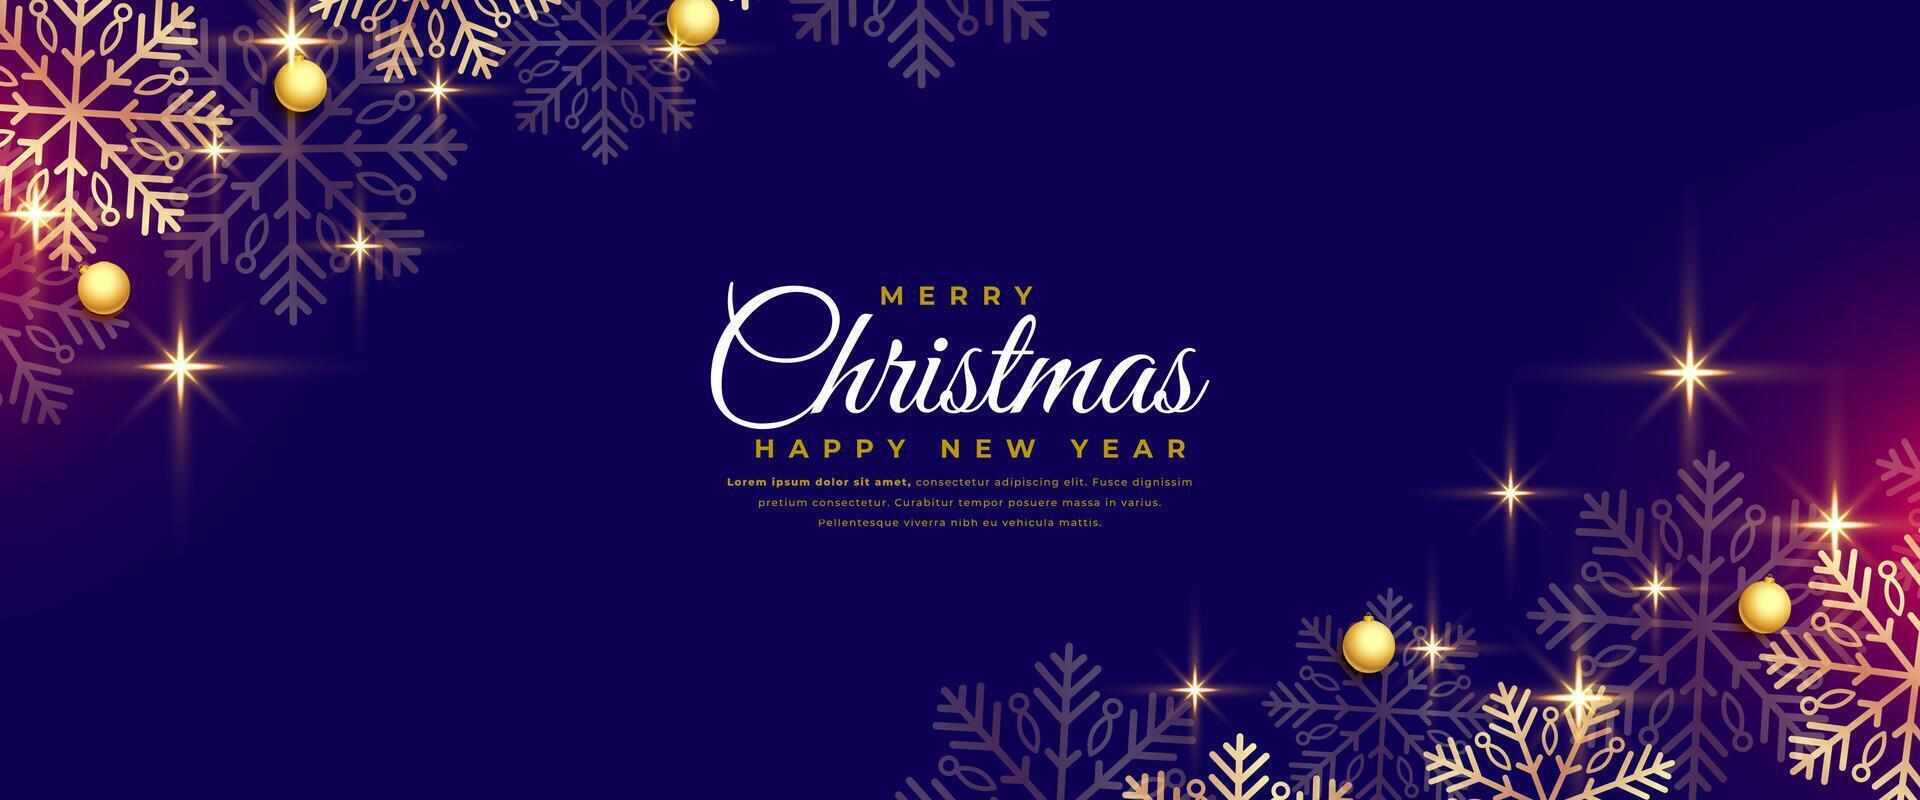 eye catching merry christmas celebration poster with snowflake decor vector